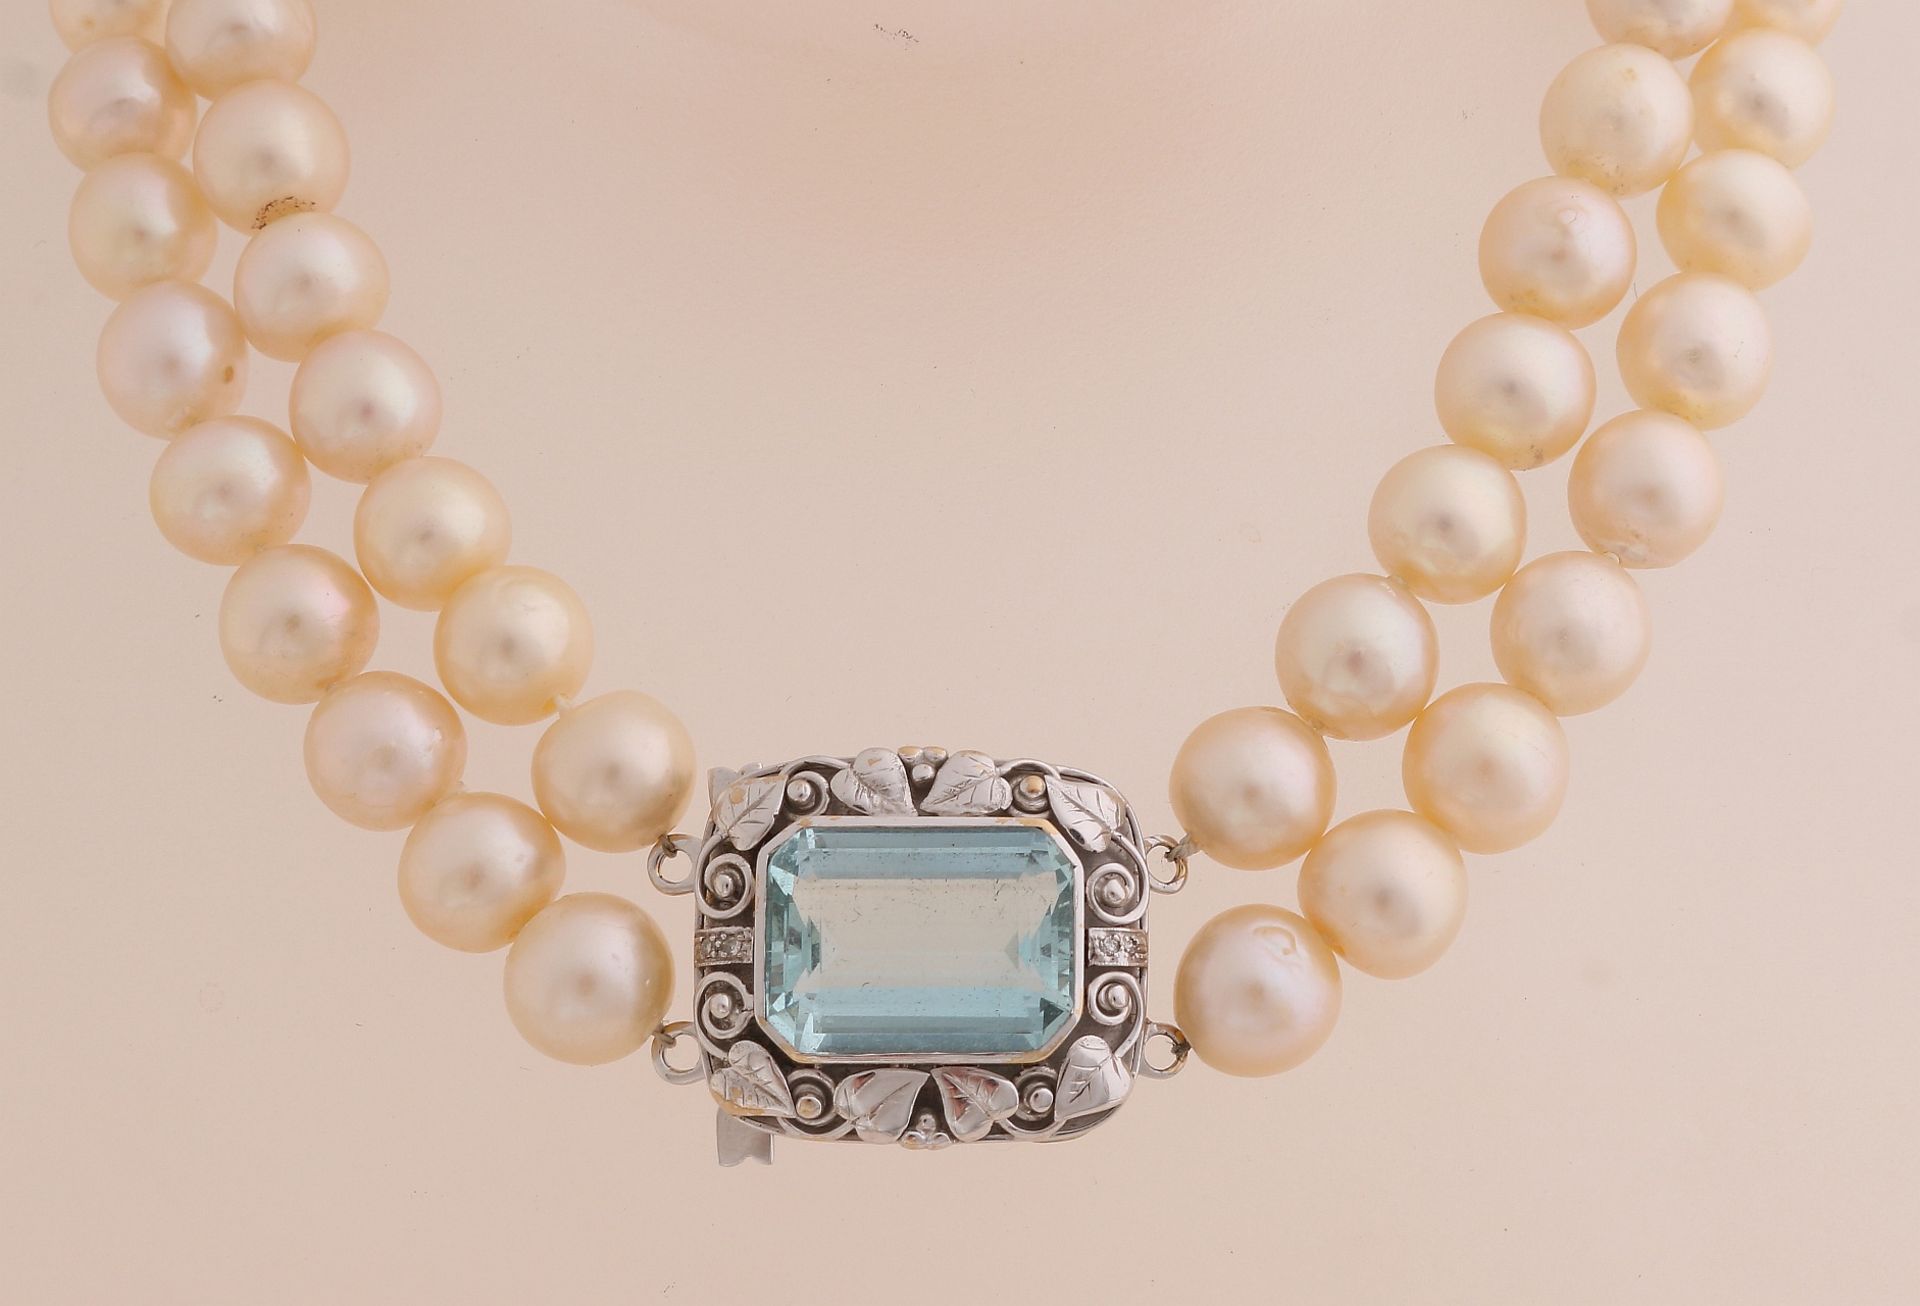 Capital pearl necklace